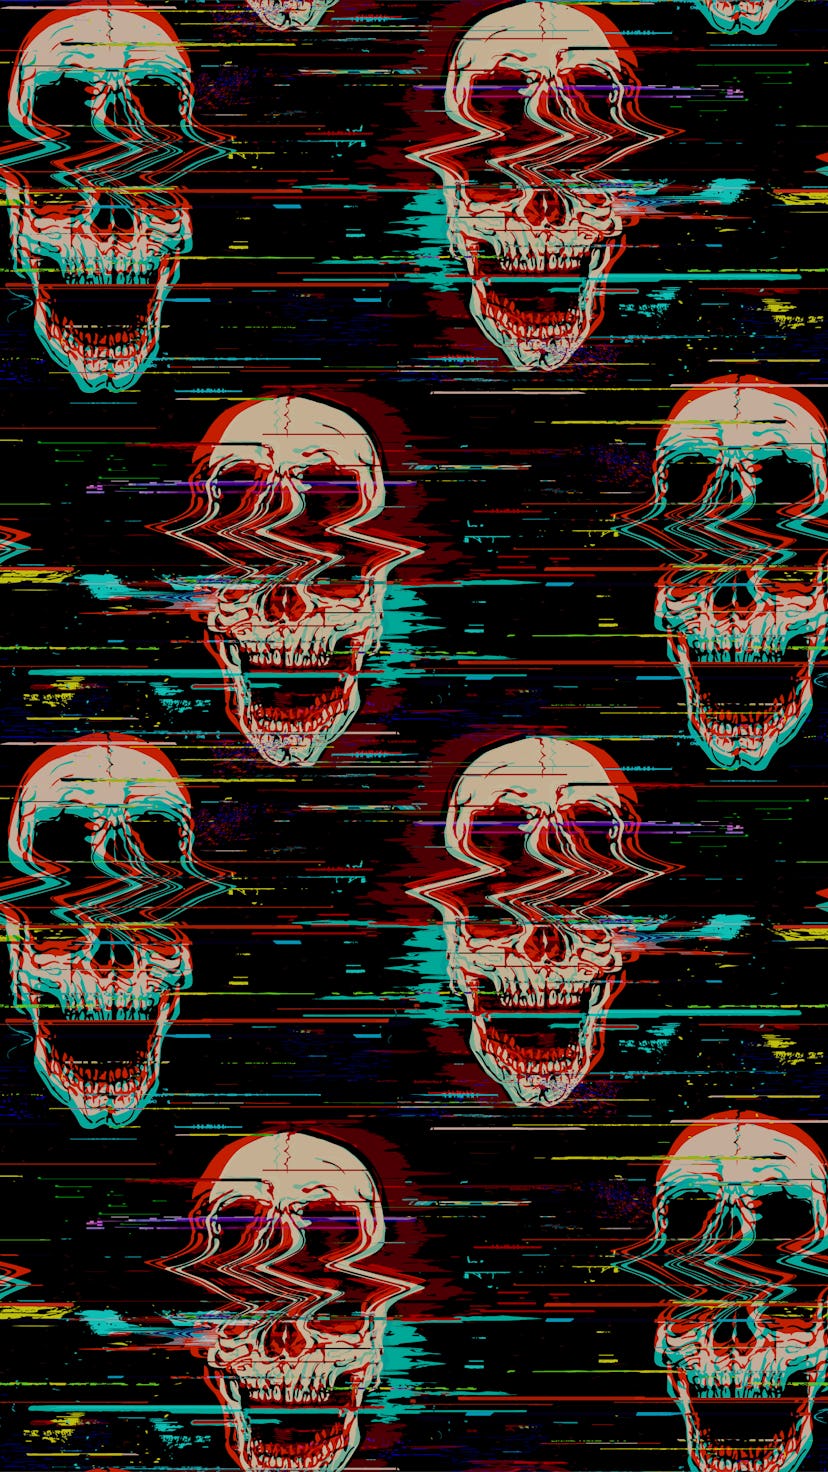 Digital seamless pattern of glitch screaming skull illustration with noise interference from hand dr...